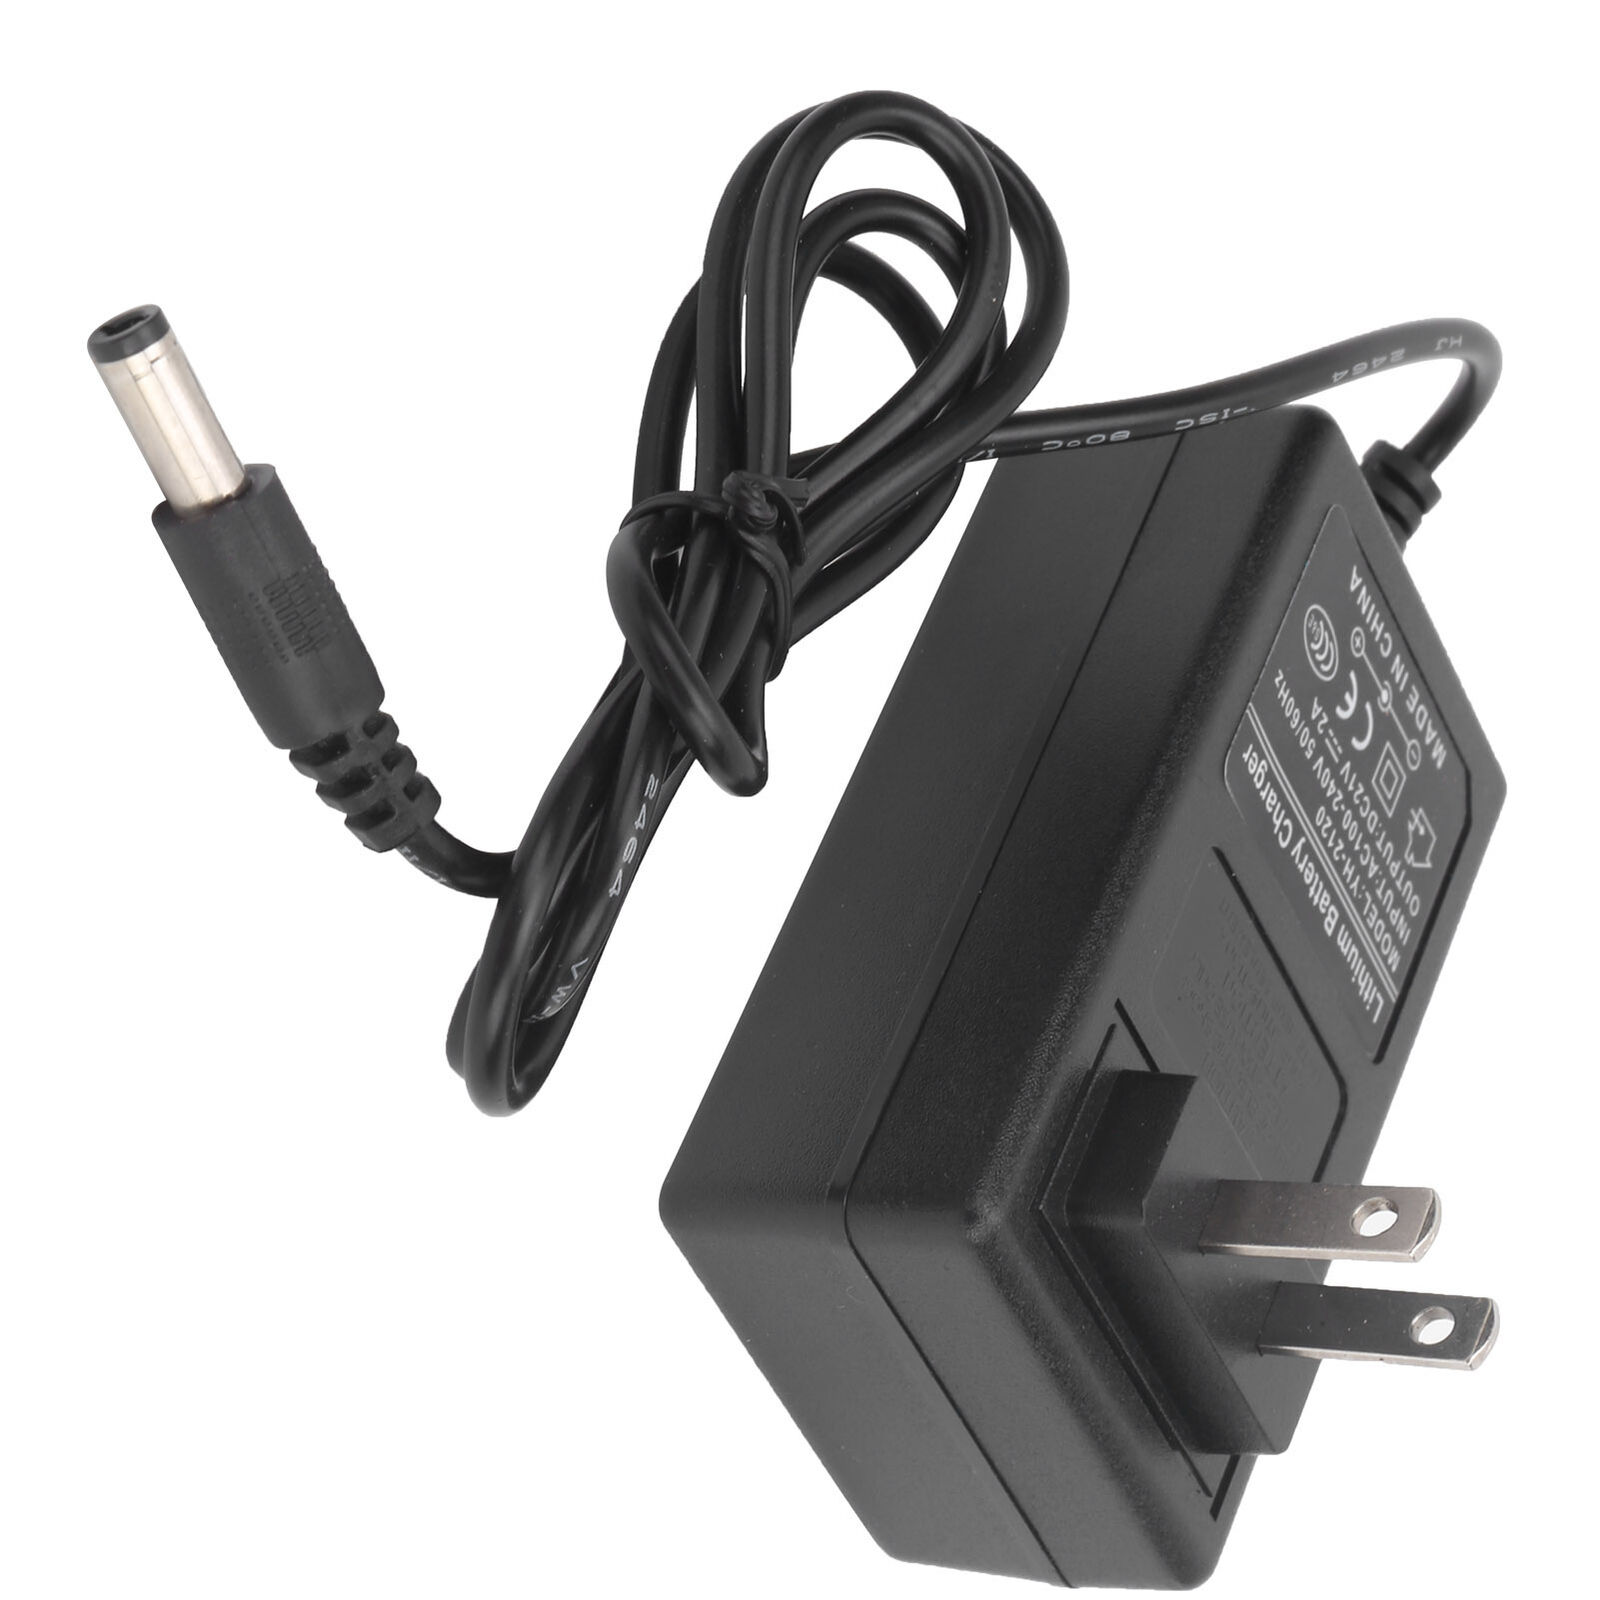 AC Power Adapter For Logitech Squeezebox Radio PSAA18R-180 993-000385 Brand Unbranded Compatible Brand Logitech Compati